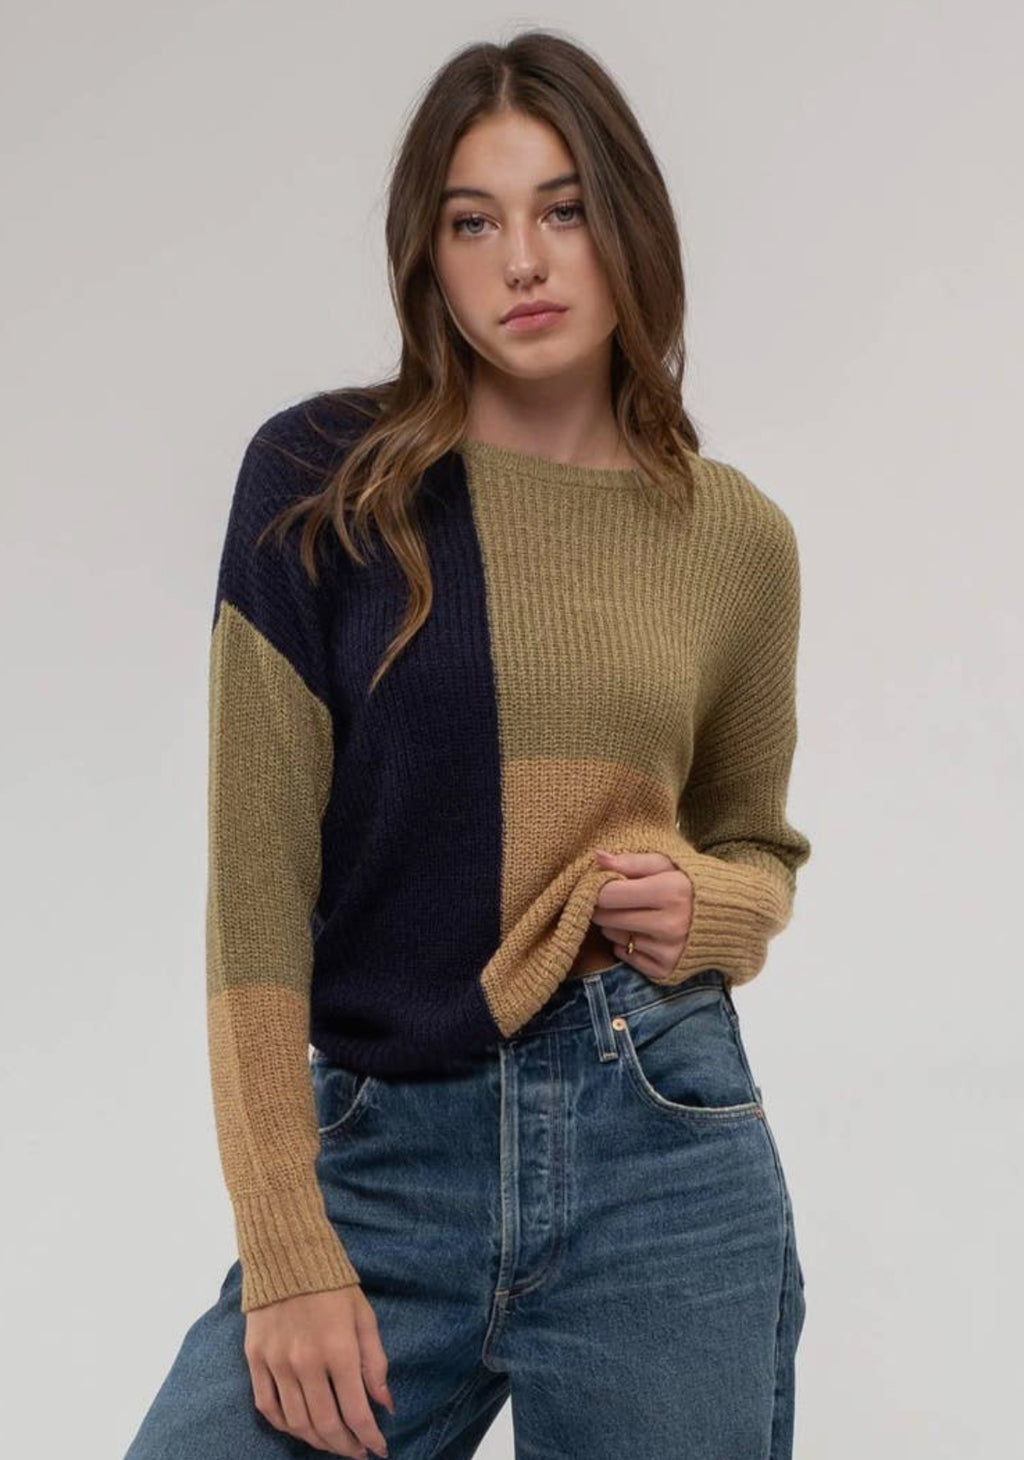 Angelina Color Block Knit Pullover